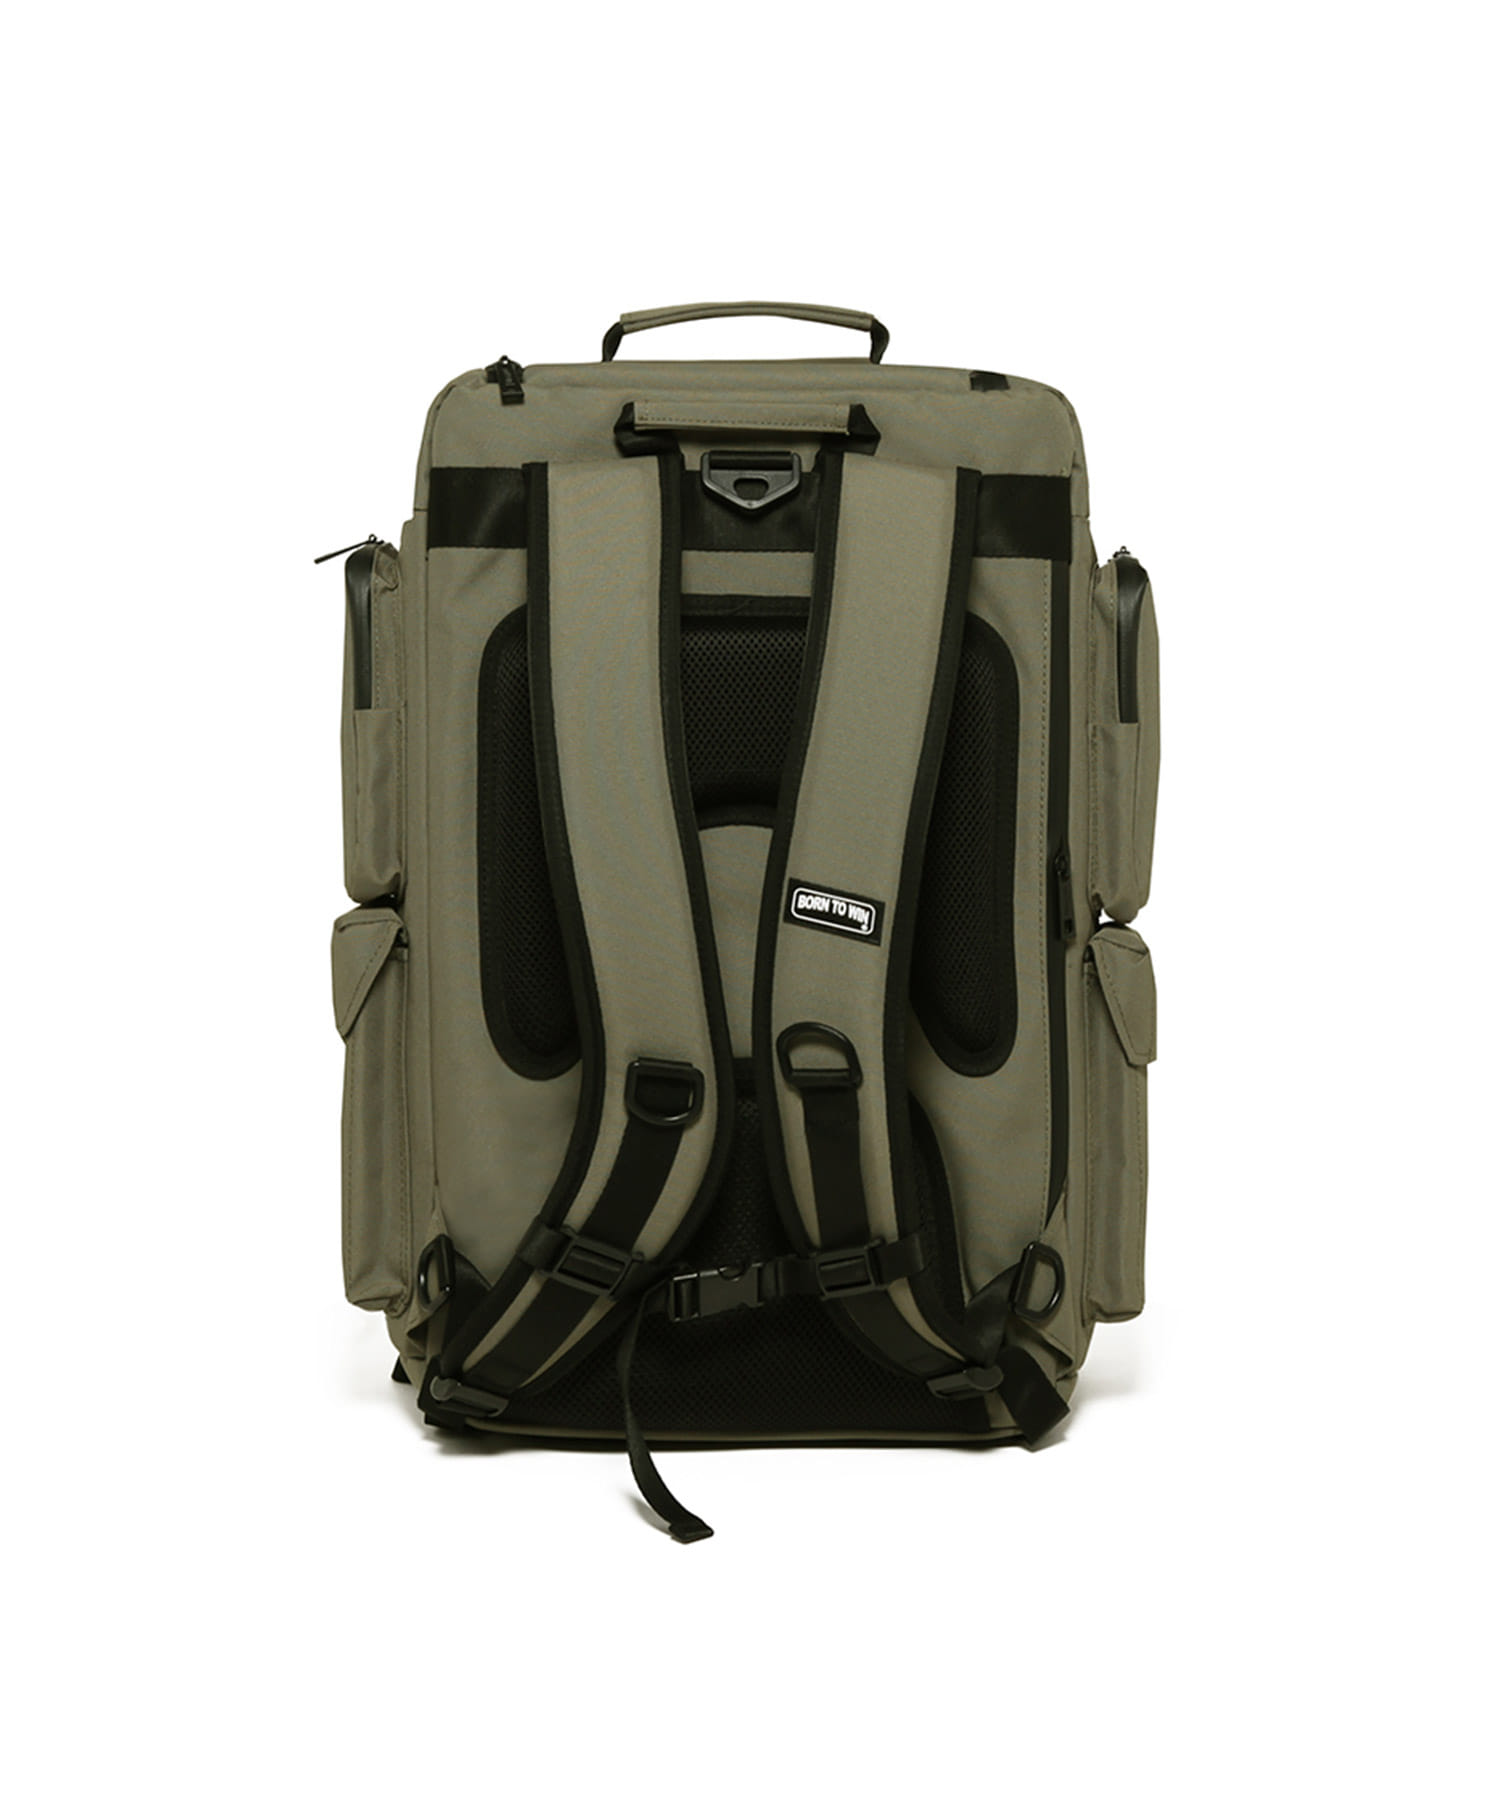 B2 BACKPACK NO PATCH VER [KHAKI]